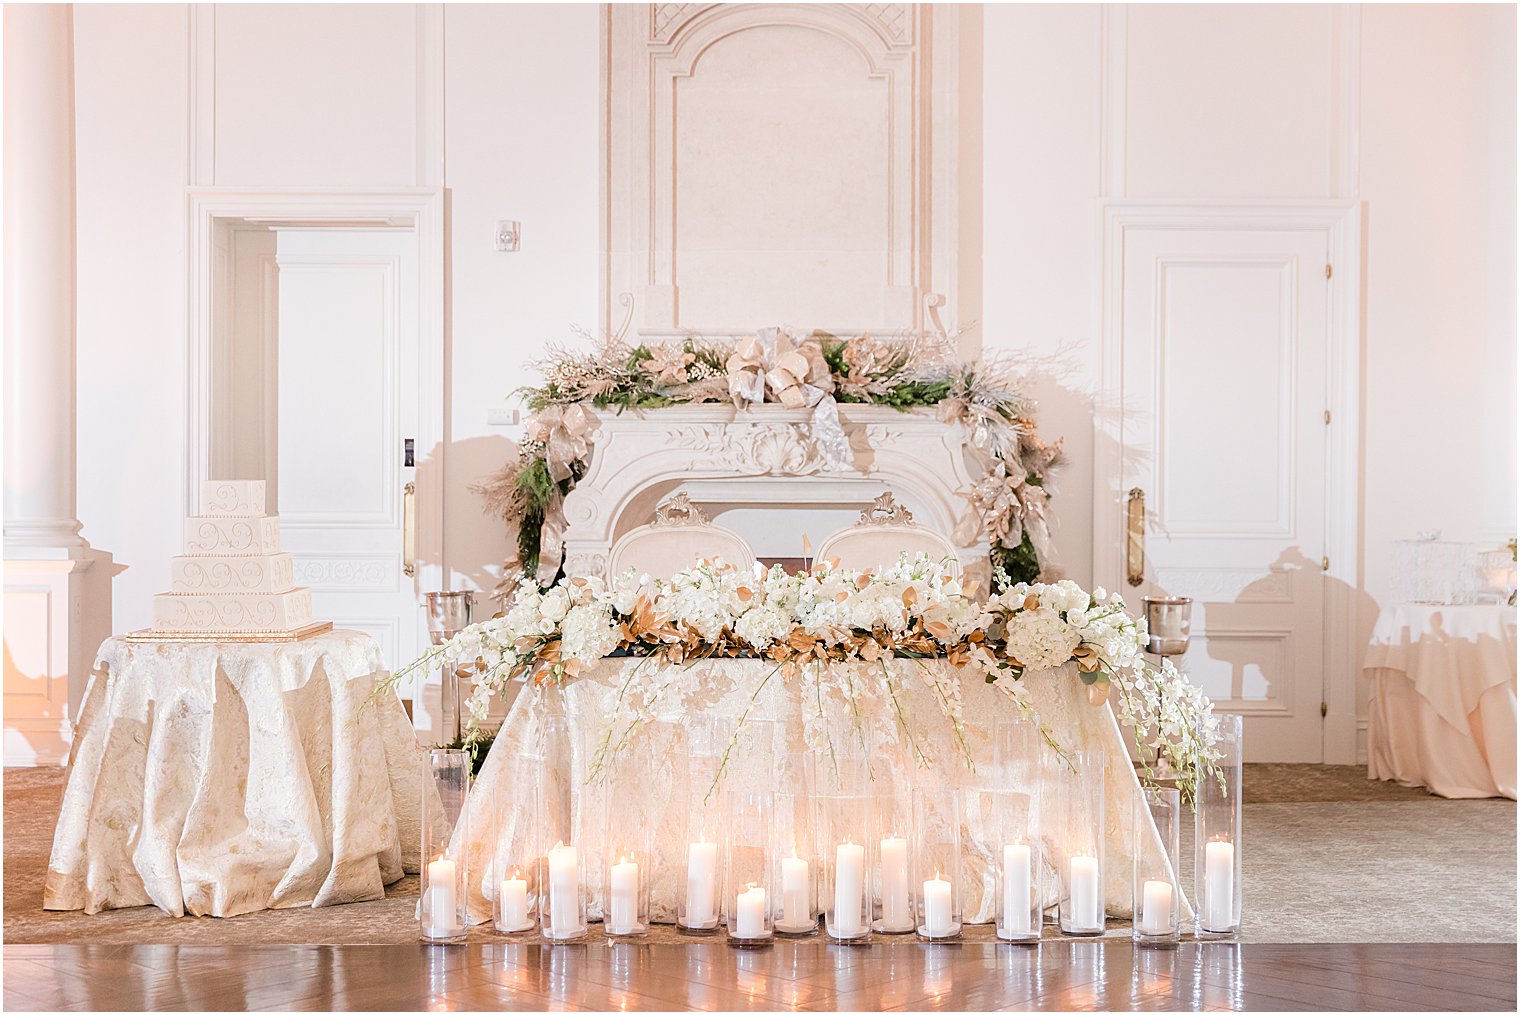 winter sweetheart table by fireplace with greenery draped on top